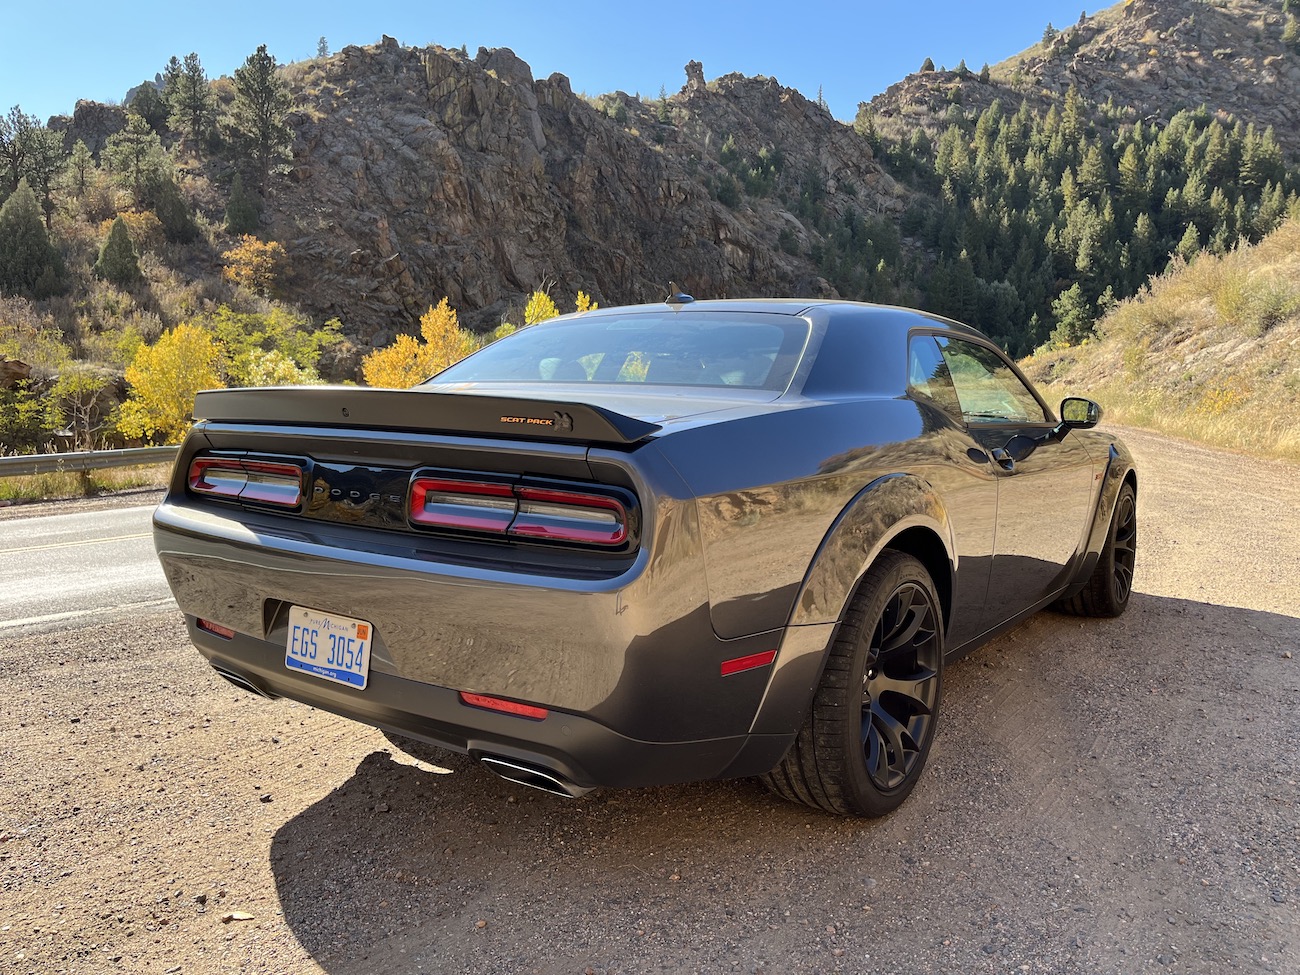 A rear view of the 2022 Dodge Challenger Scat Pack